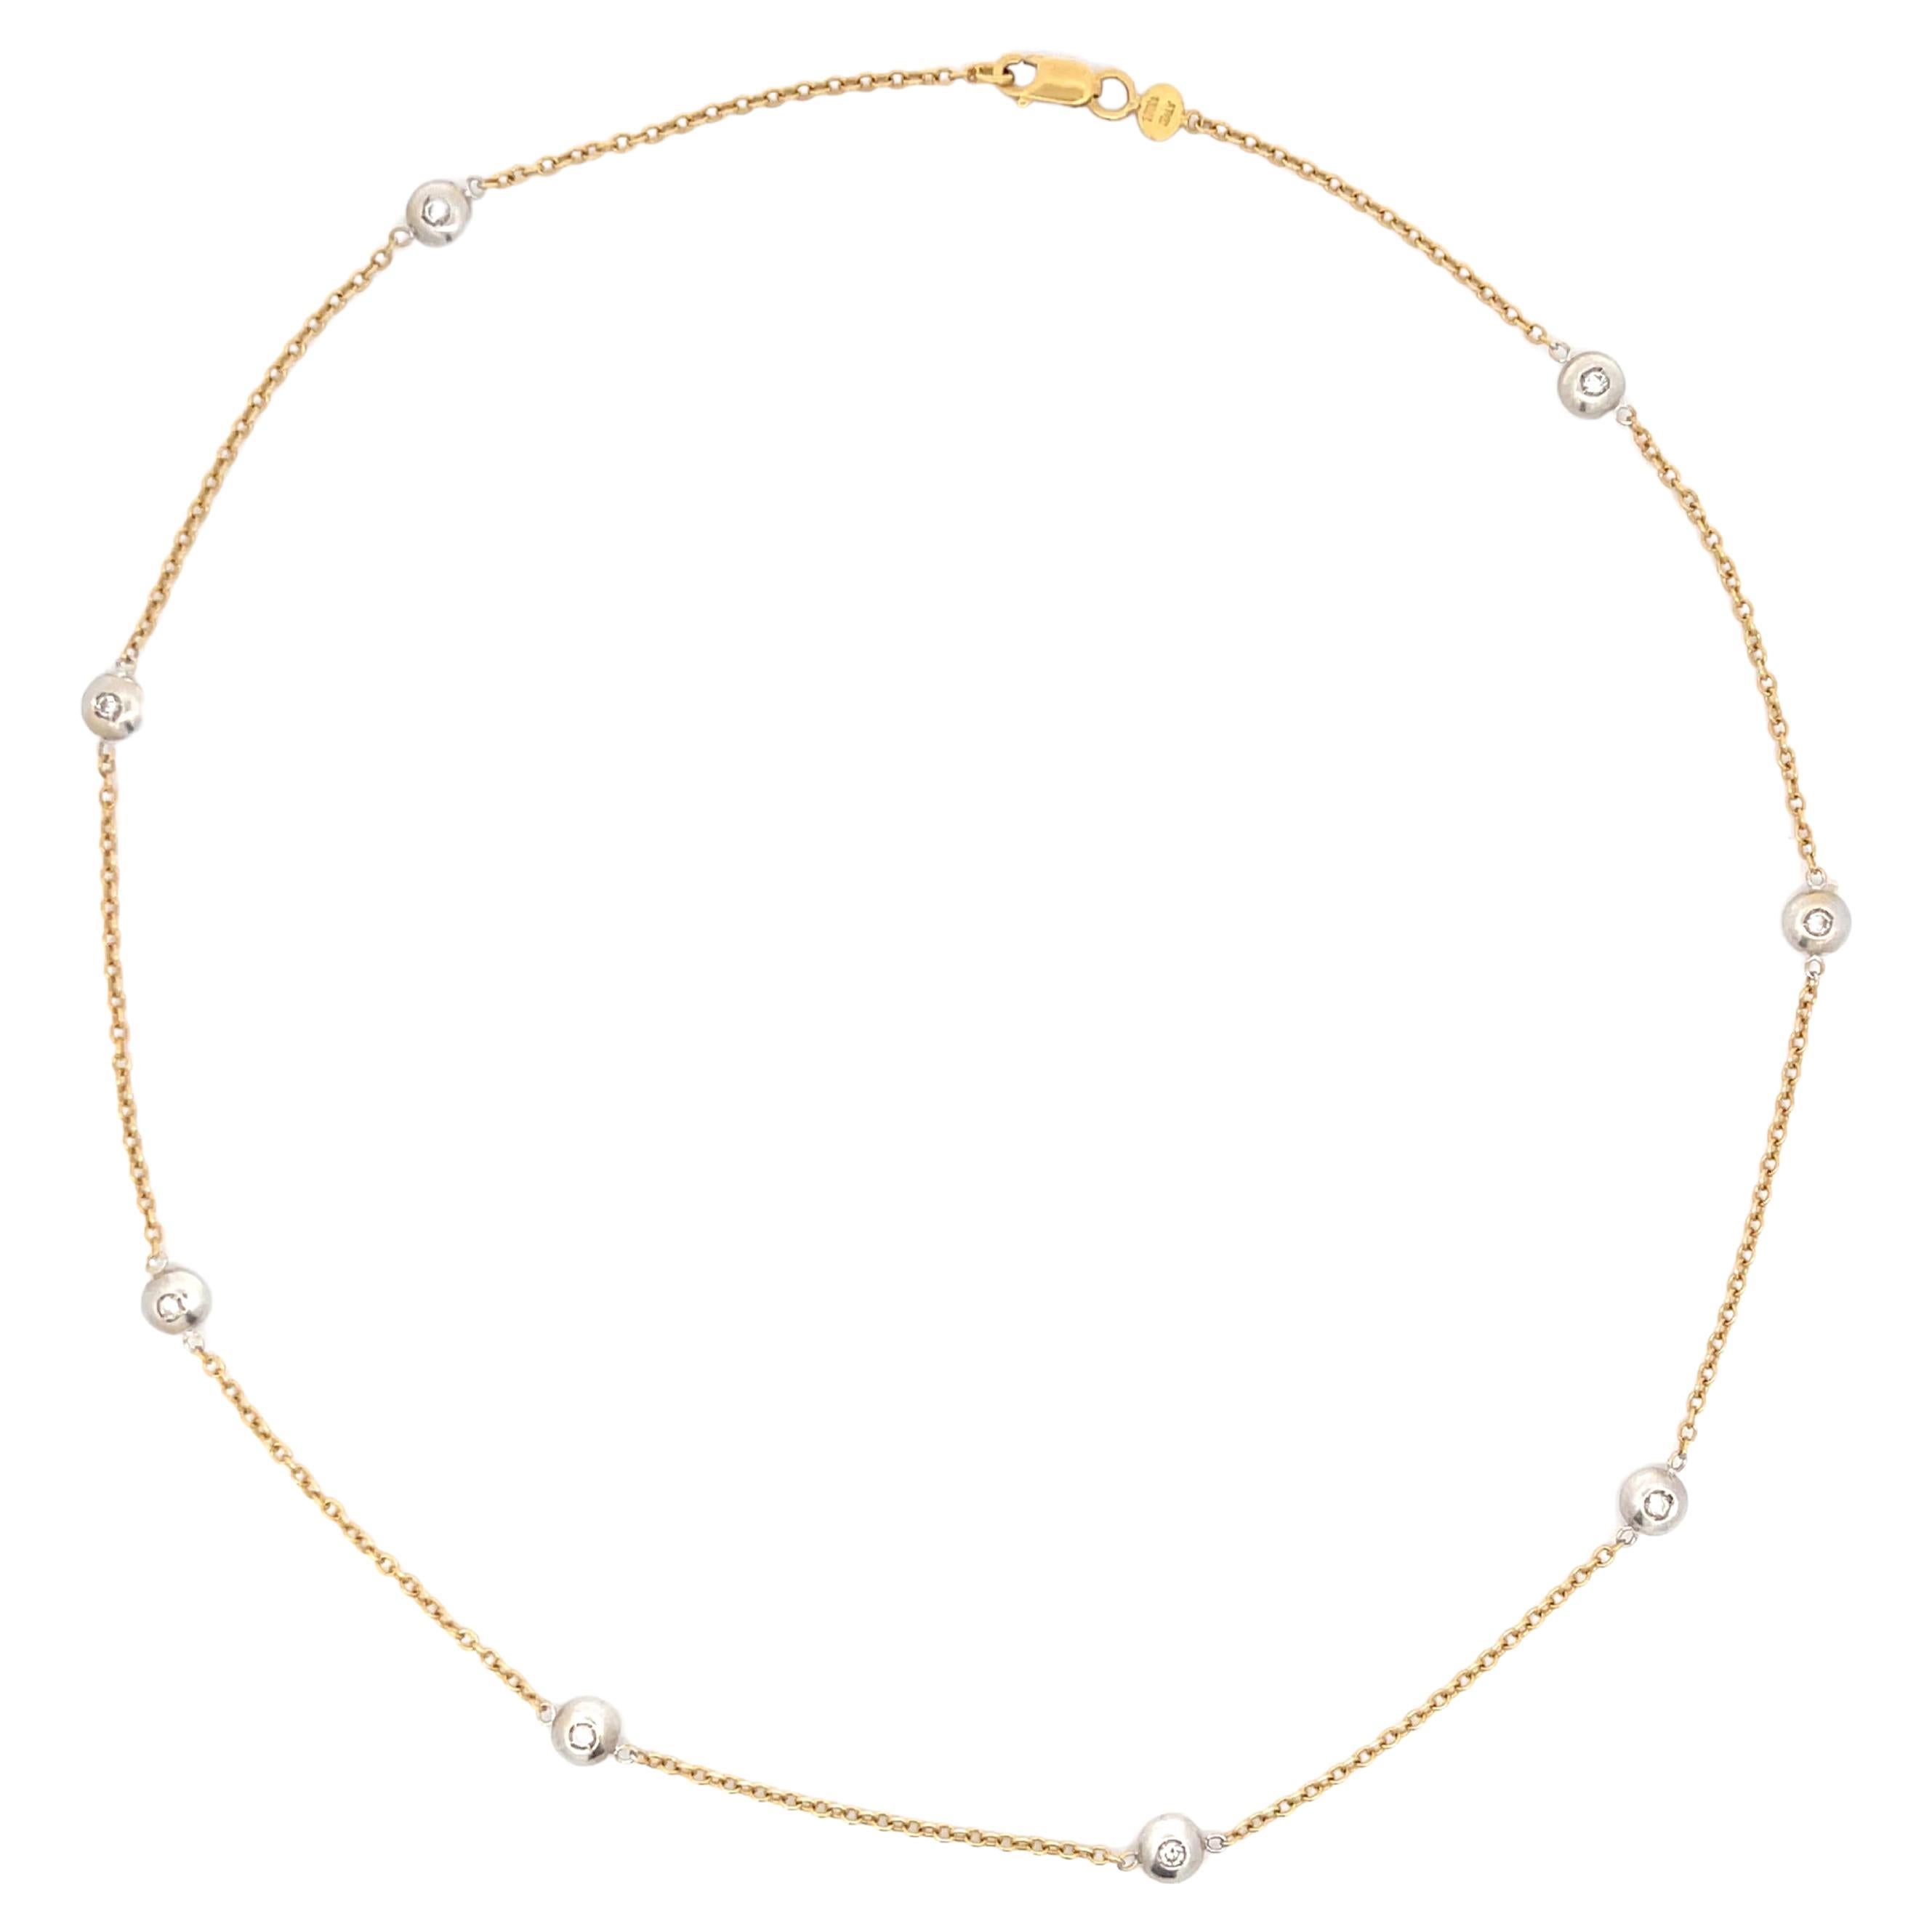 8 Diamond Circles Chain Necklace in 18k Yellow and White Gold